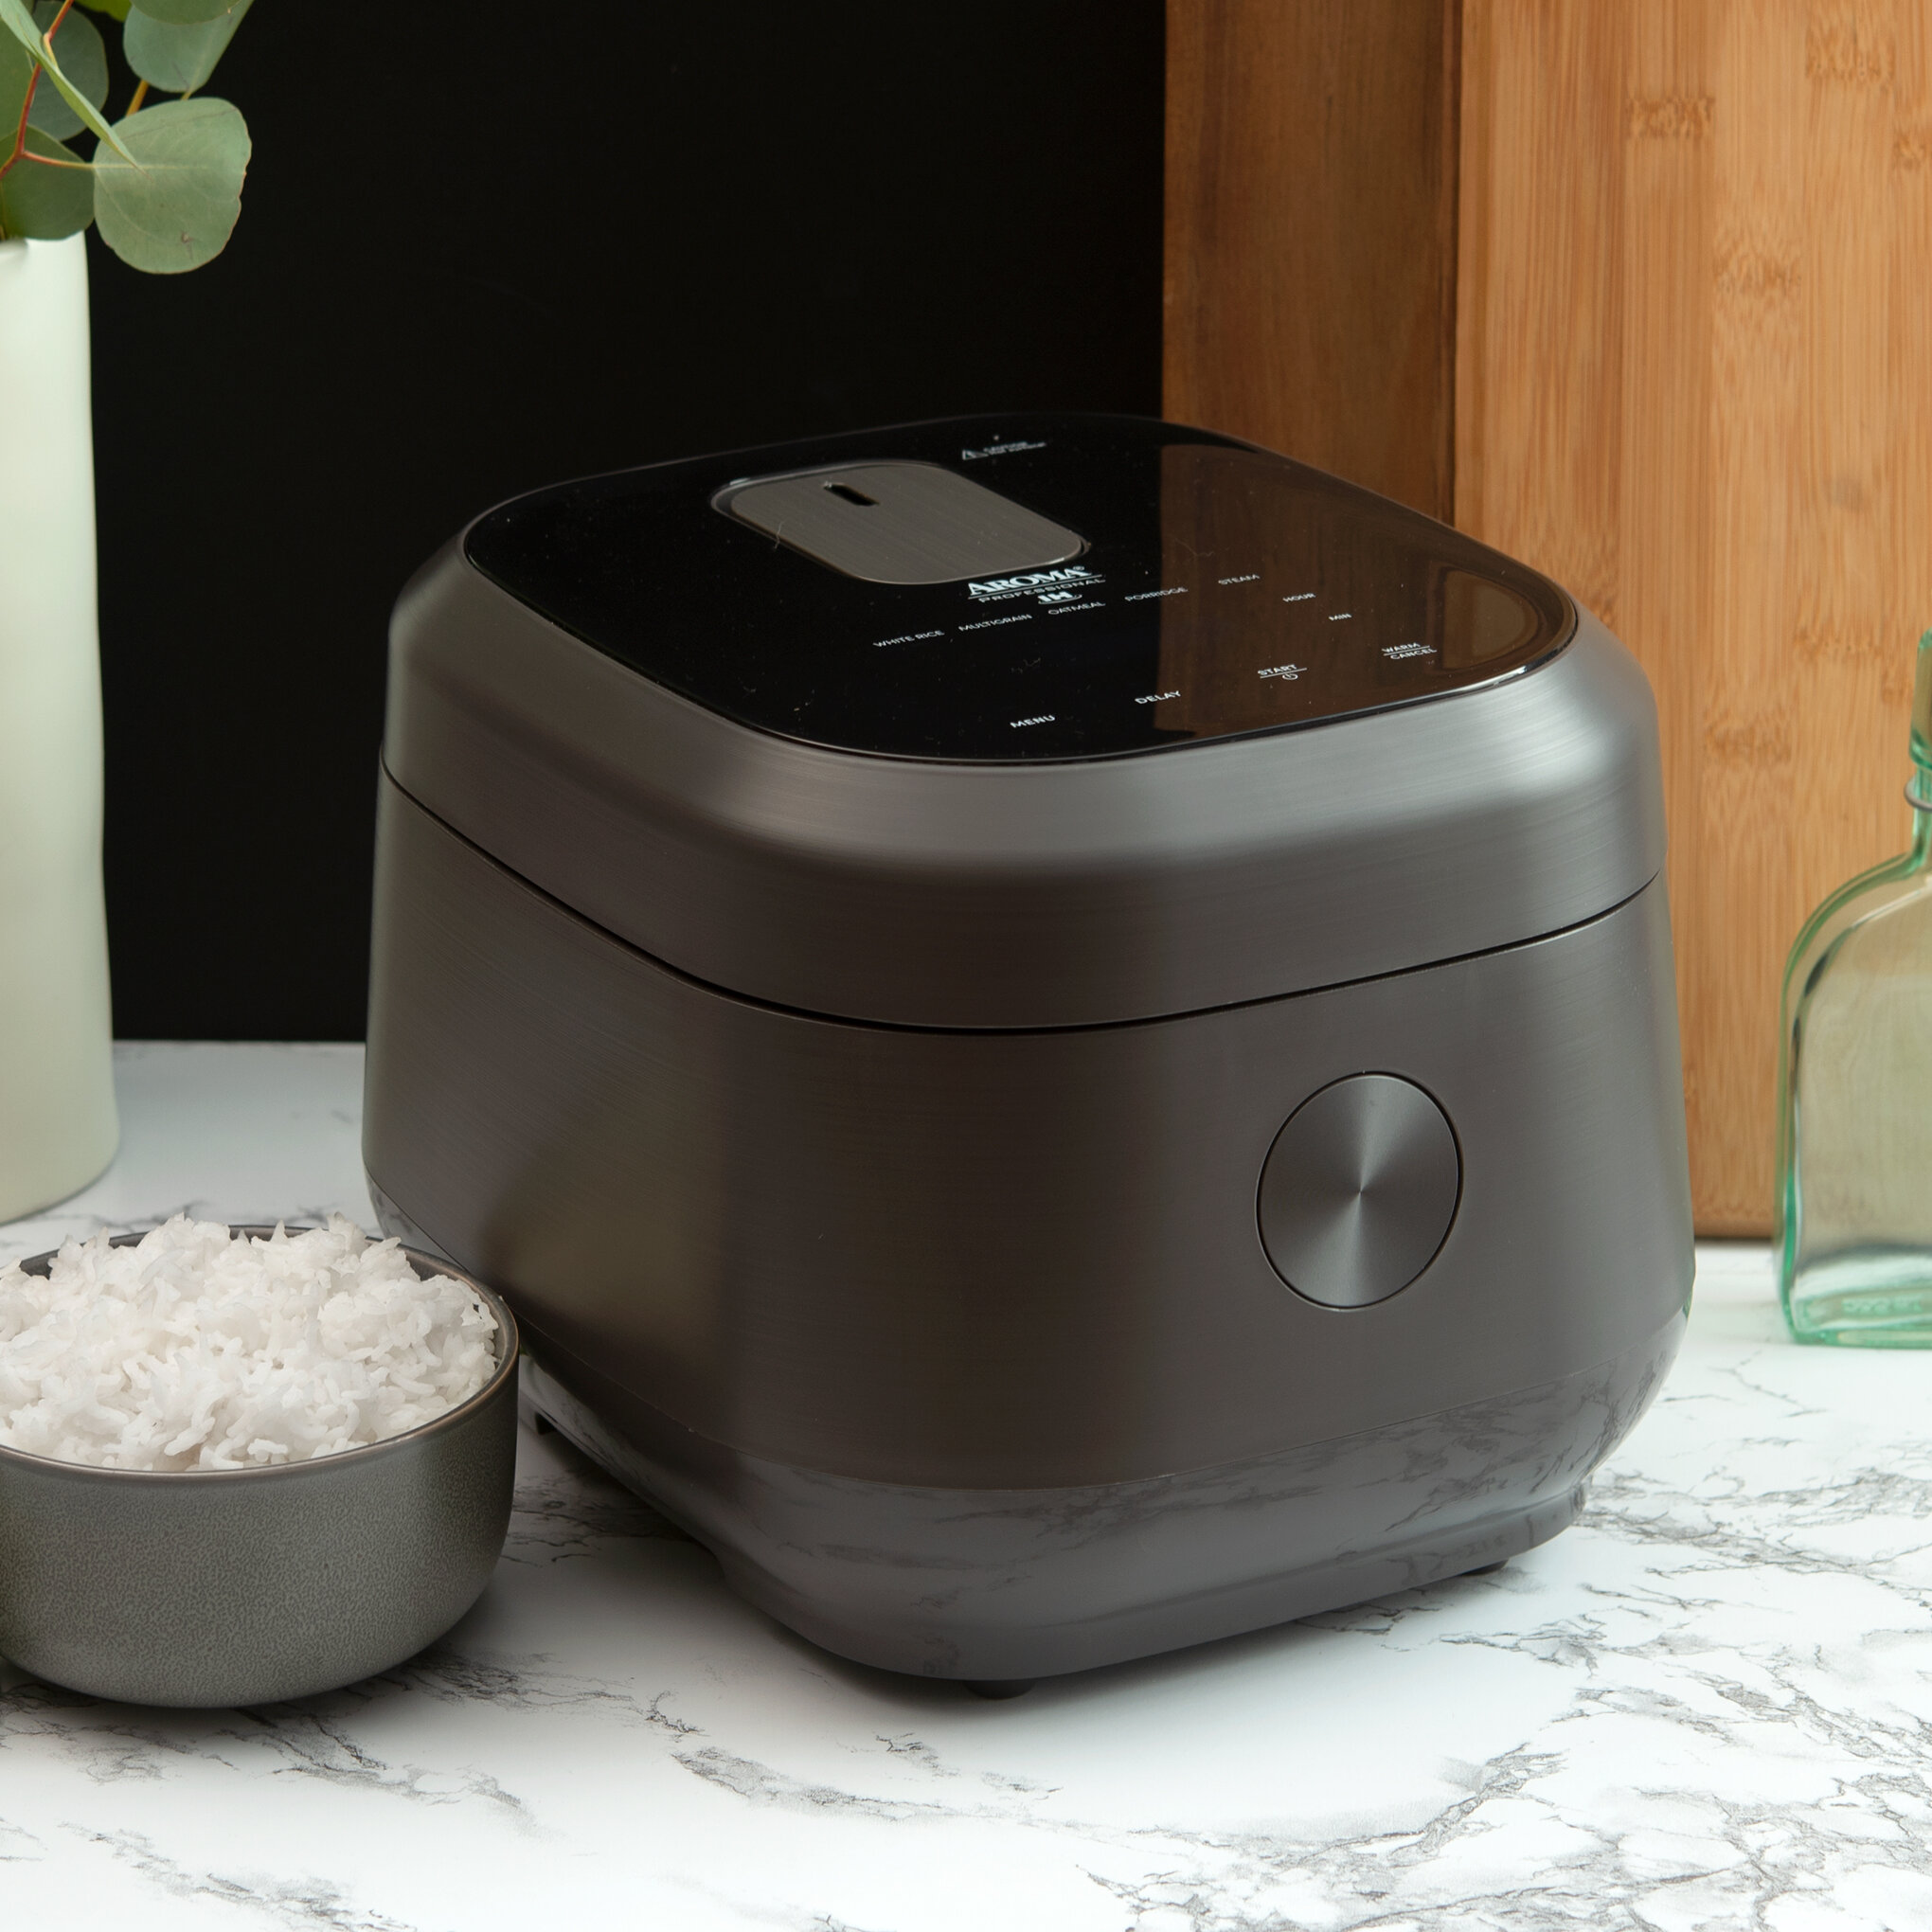 Aroma Professional 12-Cup (Cooked)/4Qt. Digital Rice Cooker & Multicooker  with Ceramic Inner Pot, White (ARC-6206C) 